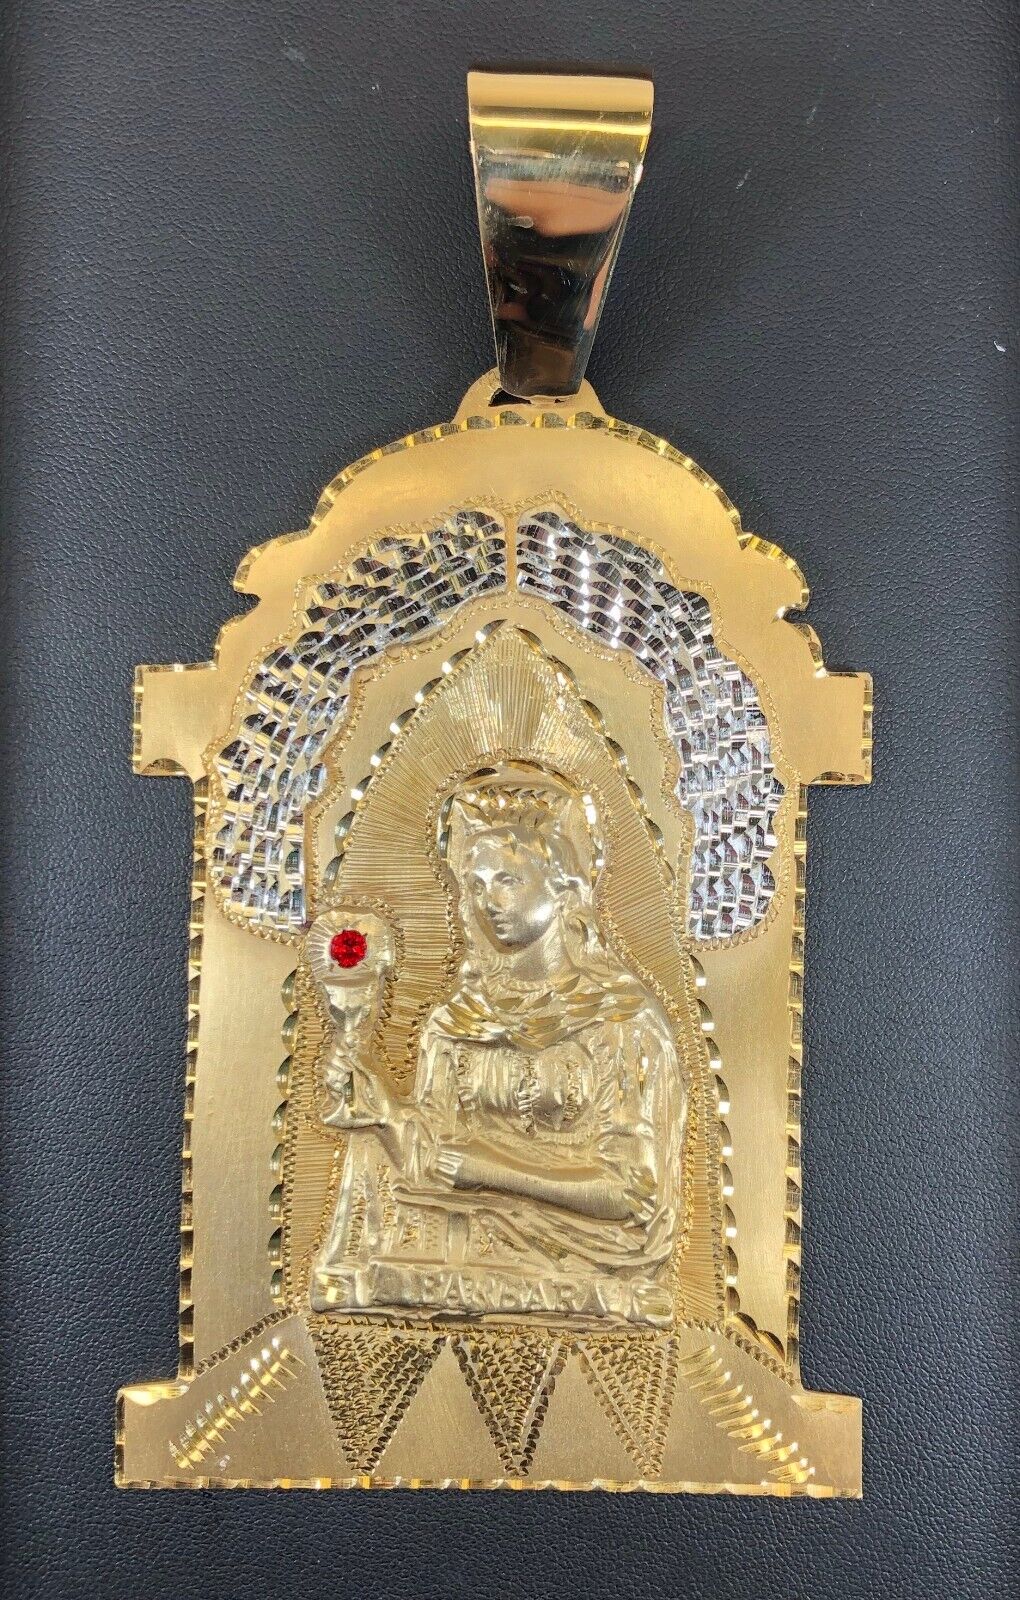 ST BARBARA Medallion Silver 925 With Gold Plating